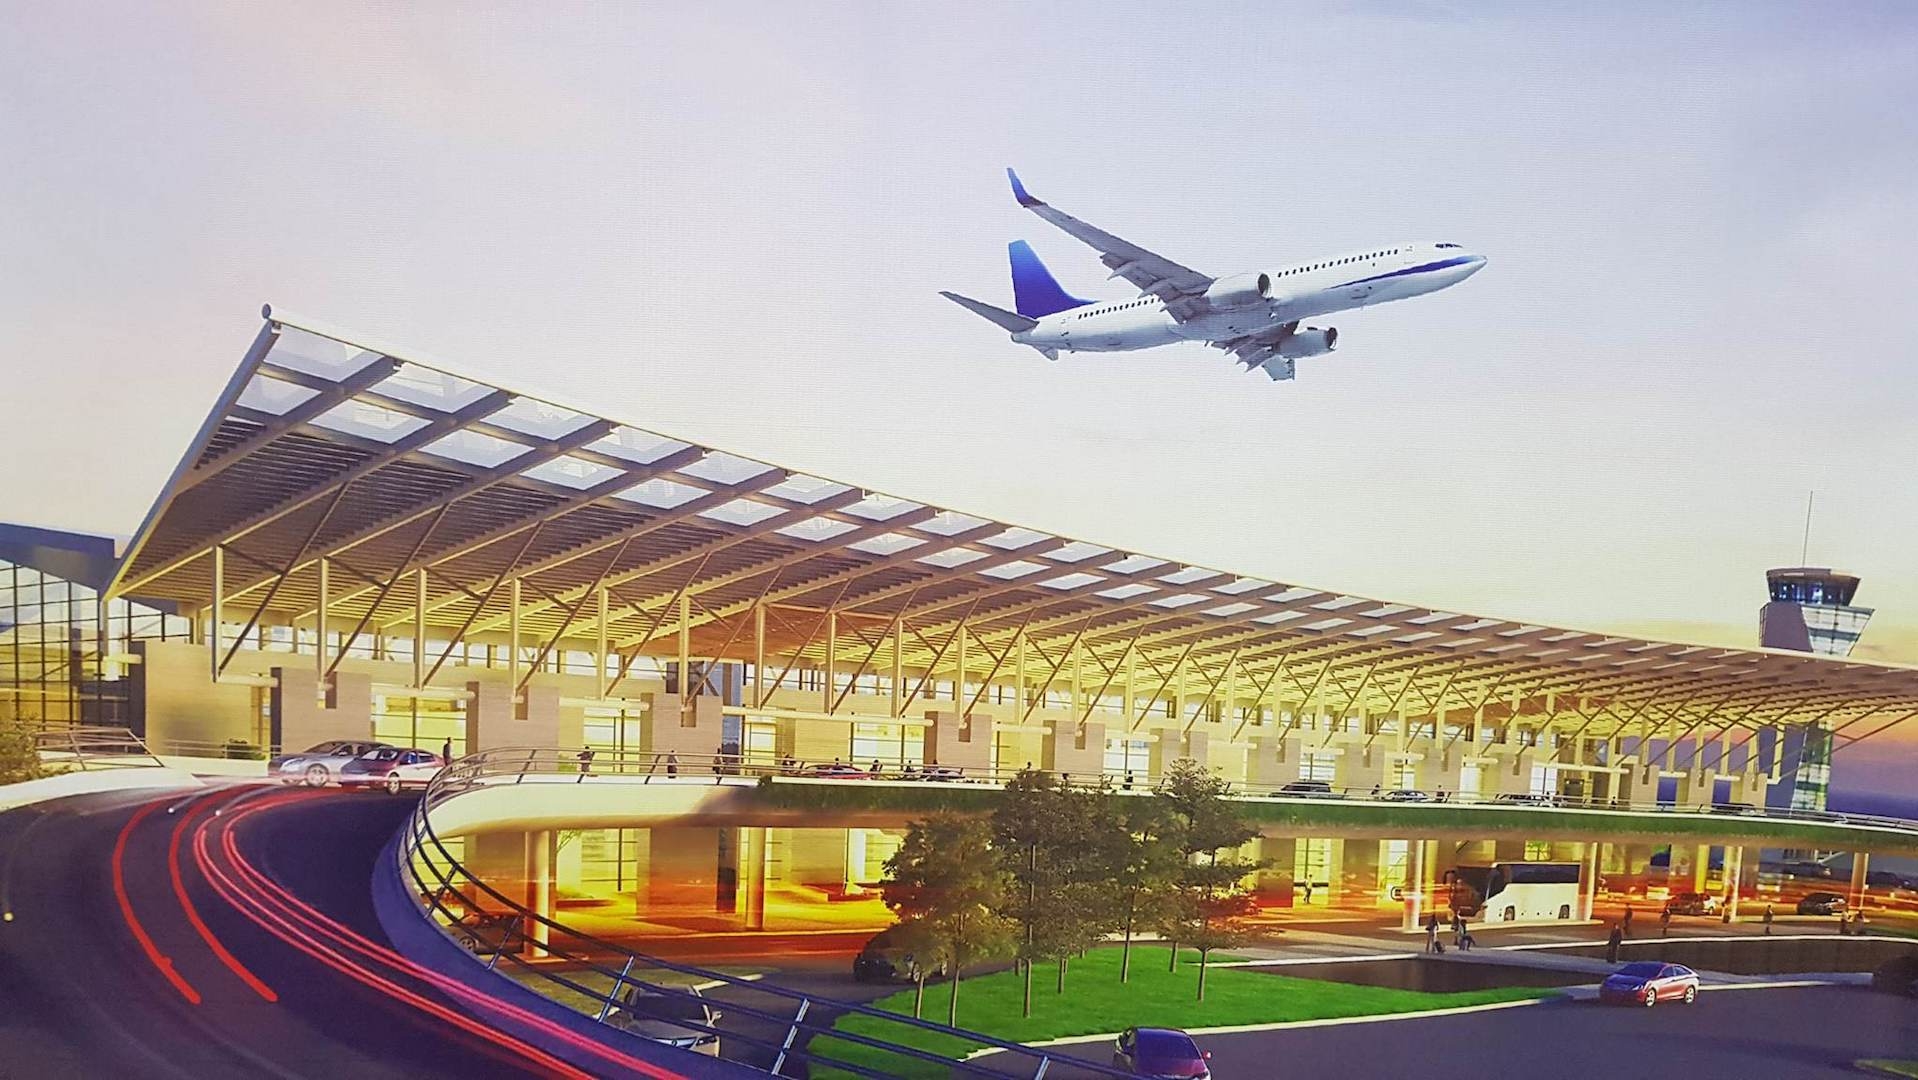 The Project of Quang Ninh International Airport in Van Don